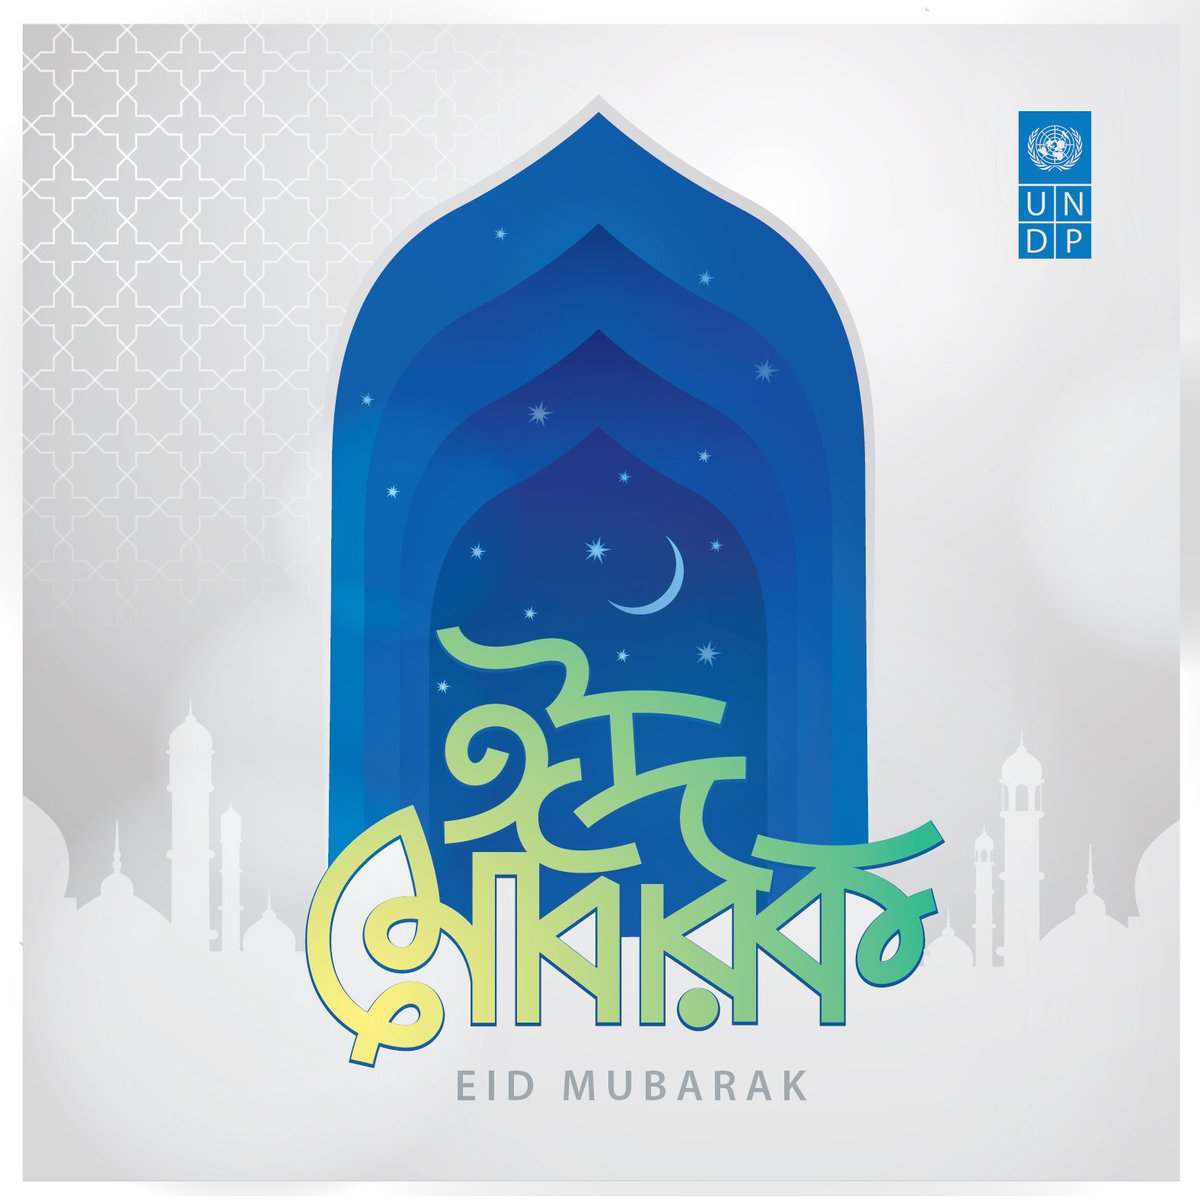 ✨ Wishing everyone celebrating a joyful #EidAlFitr2024 filled with blessings, laughter, and cherished moments with loved ones. সবাইকে পবিত্র ঈদ উল ফিতর - এর শুভেচ্ছা! 🌙